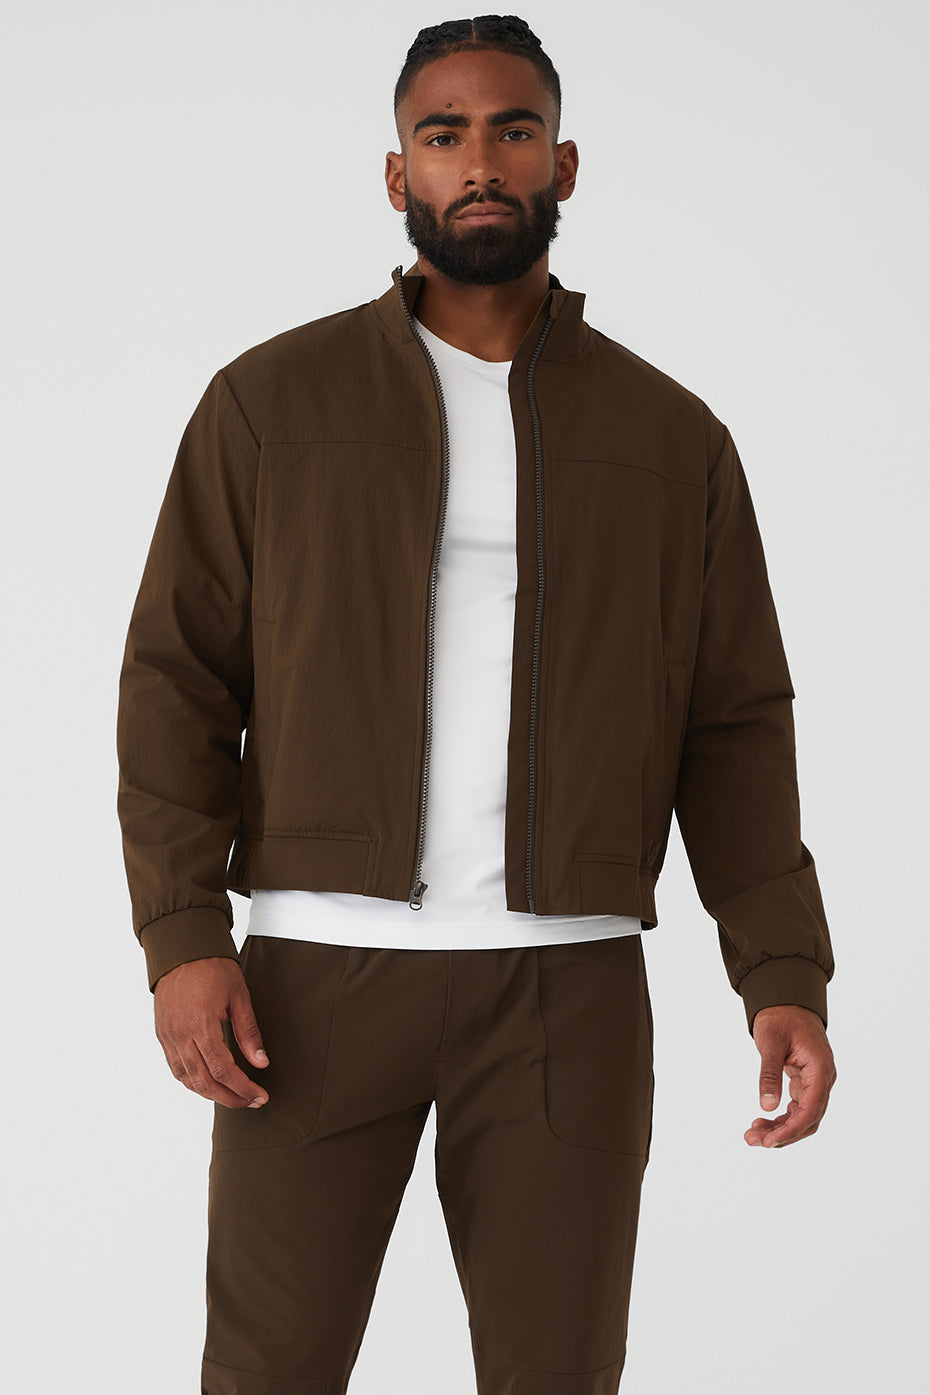 Alo Co-op Bomber Jacket in Espresso at Nordstrom, Size Small